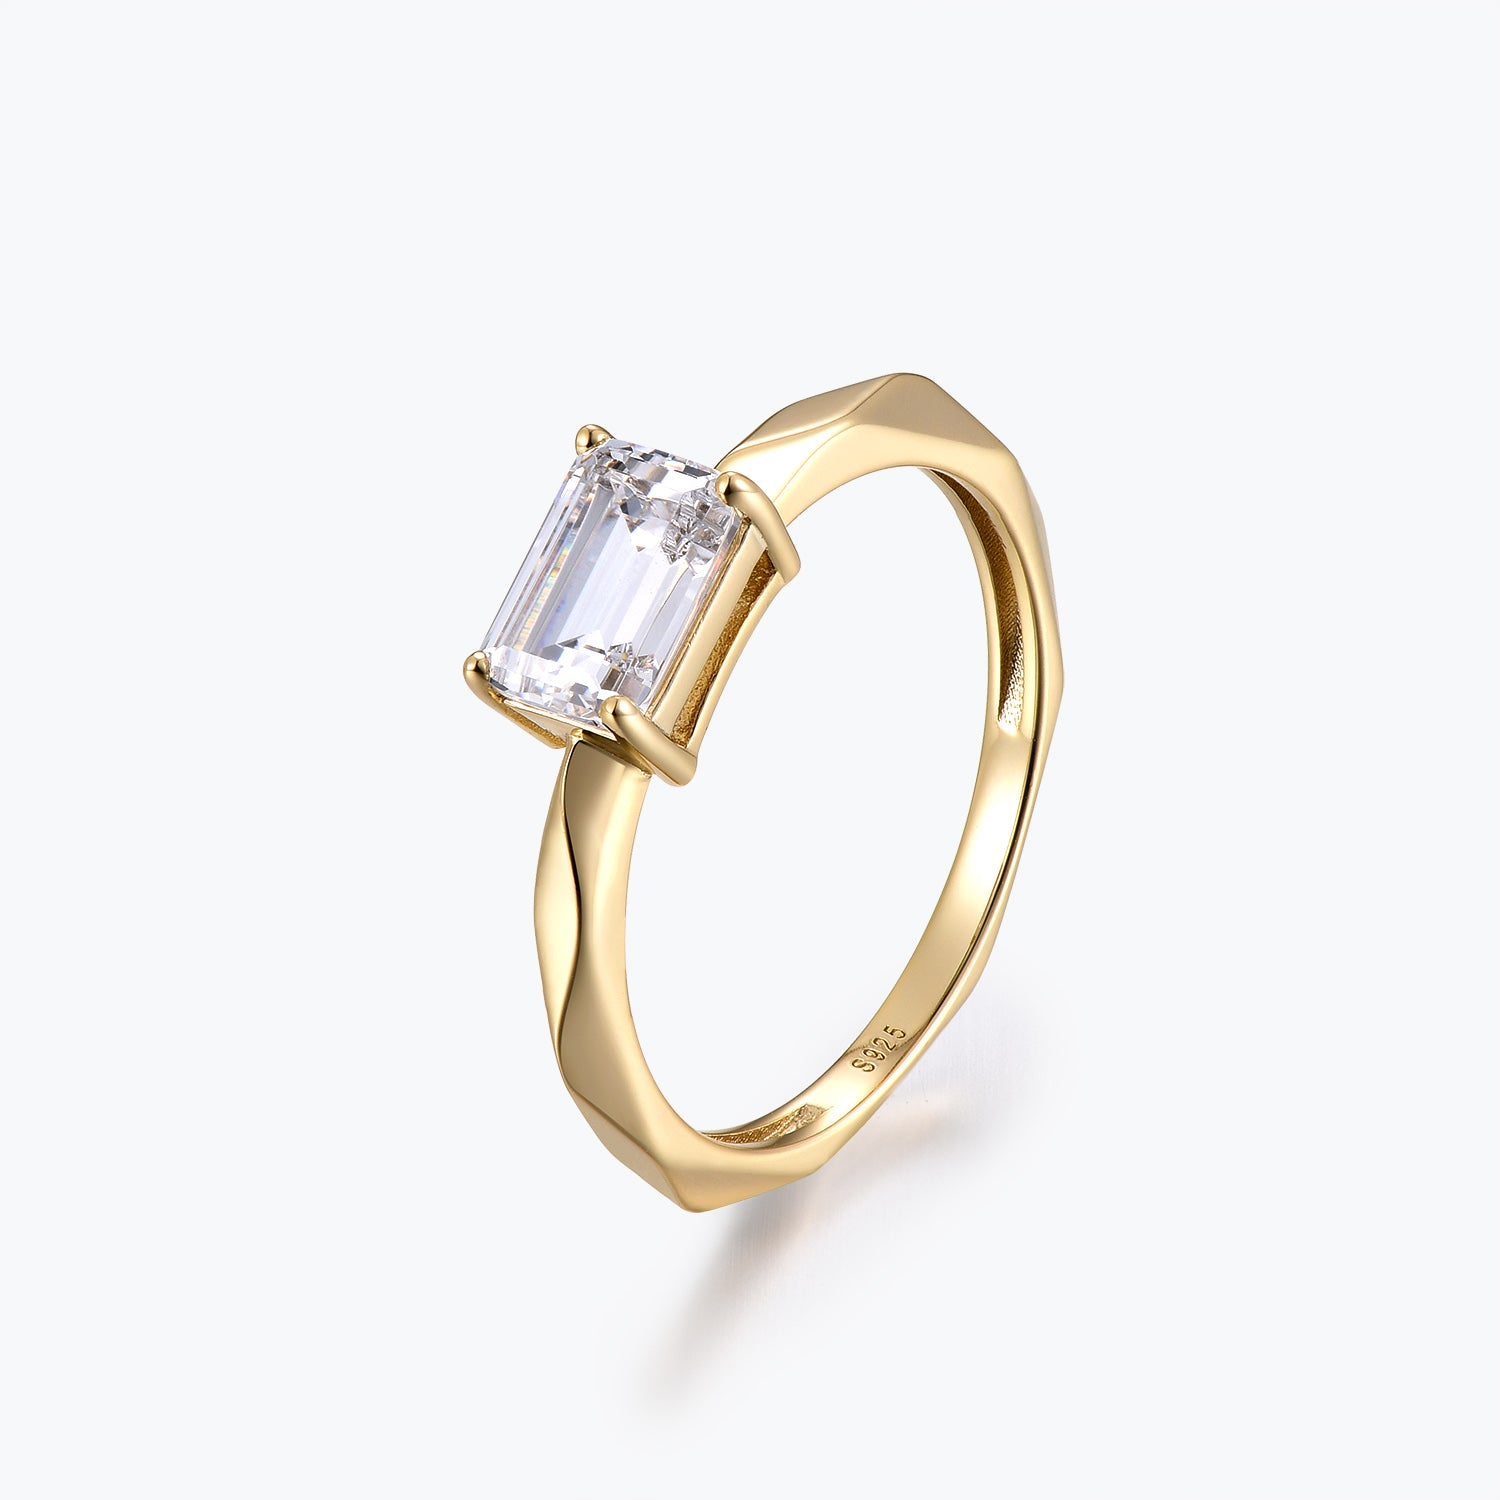 Dissoo® 0.60 ct Emerald Cut Moissanite Engagement Ring in Gold Vermeil